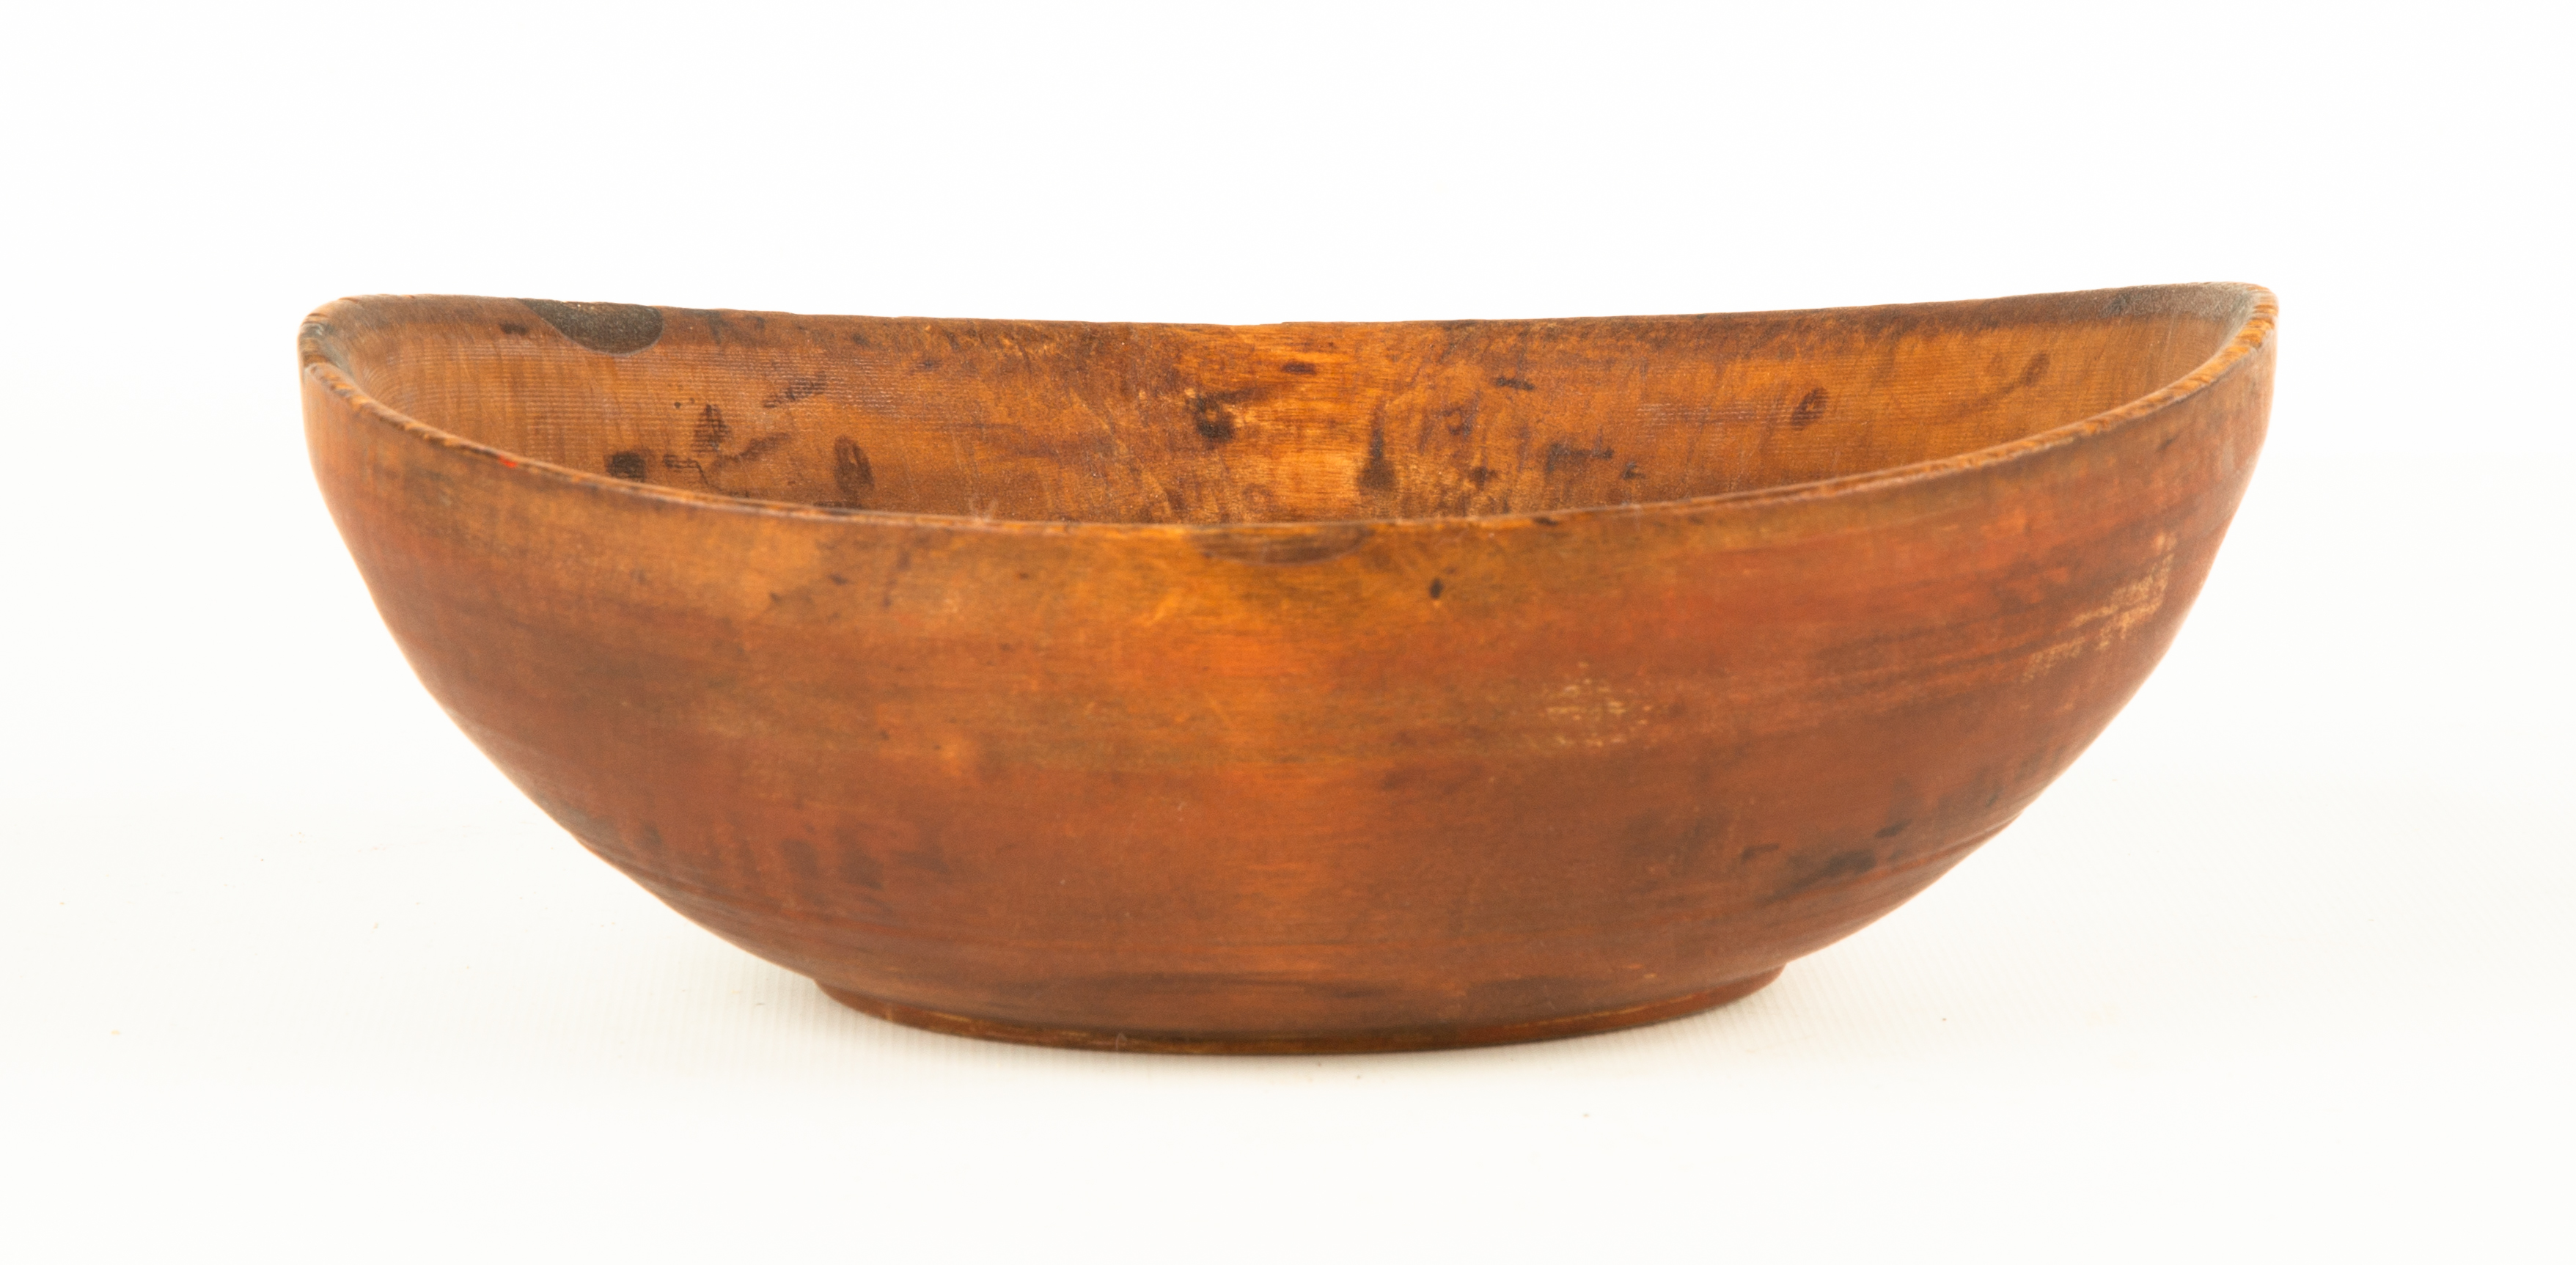 EARLY TURNED WOODEN BOWL Early